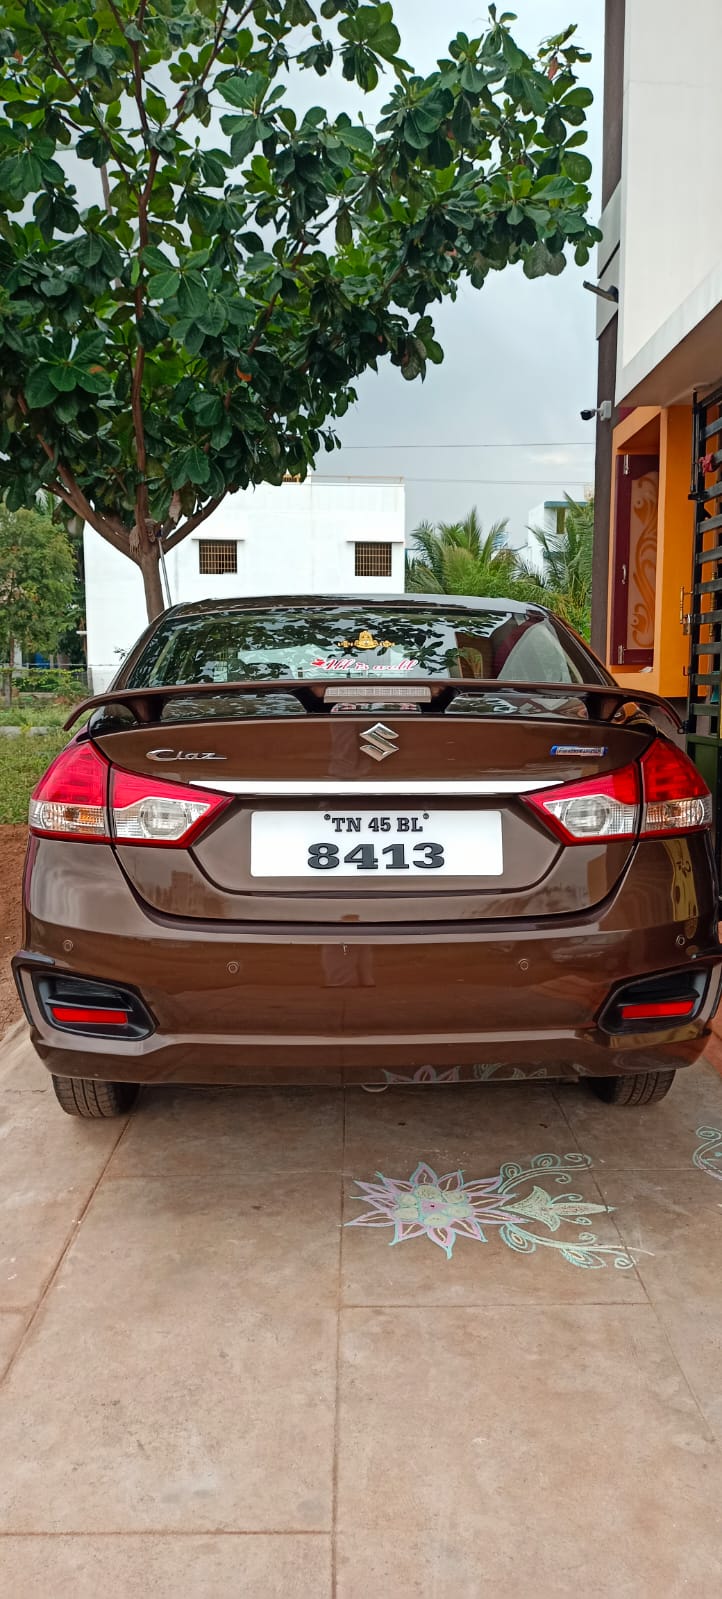 4812-for-sale-Maruthi-Suzuki-Ciaz-Diesel-First-Owner-2017-TN-registered-rs-765000